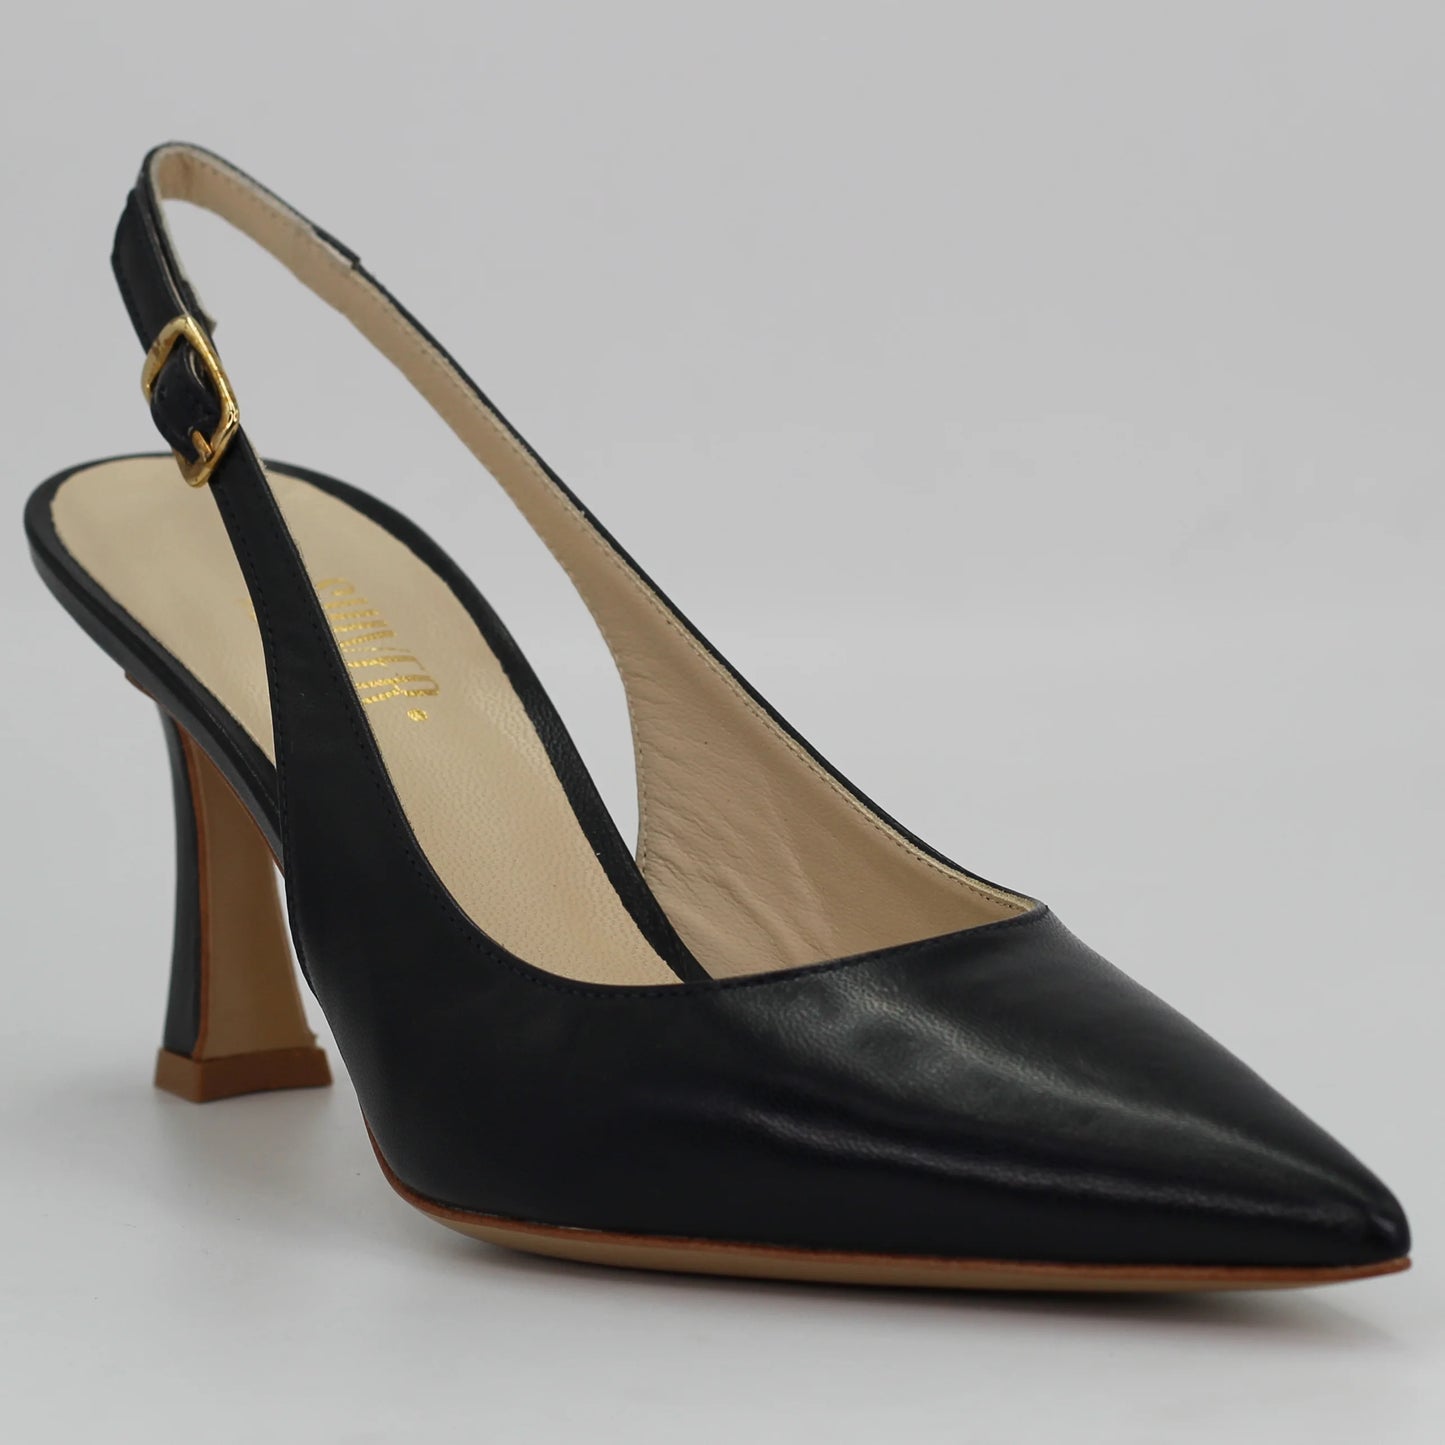 Shop Handmade Italian Leather sling back in Navy Blue (MPE581) or browse our range of hand-made Italian shoes in leather or suede in-store at Aliverti Cape Town, or shop online. We deliver in South Africa & offer multiple payment plans as well as accept multiple safe & secure payment methods.